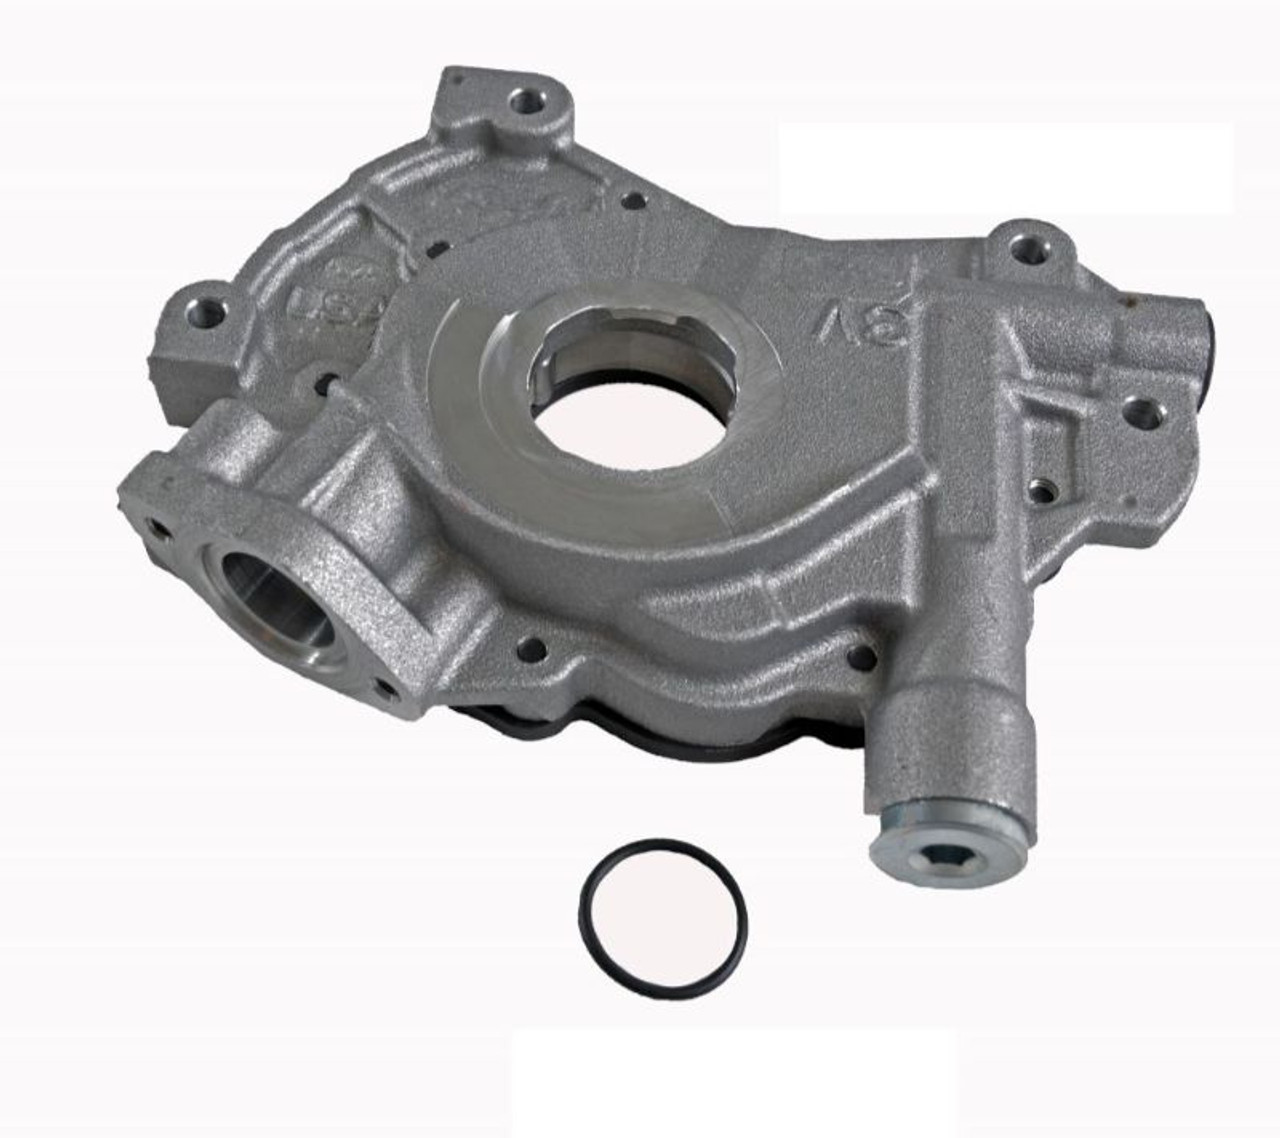 Oil Pump - 2010 Ford Expedition 5.4L (EP340.E50)